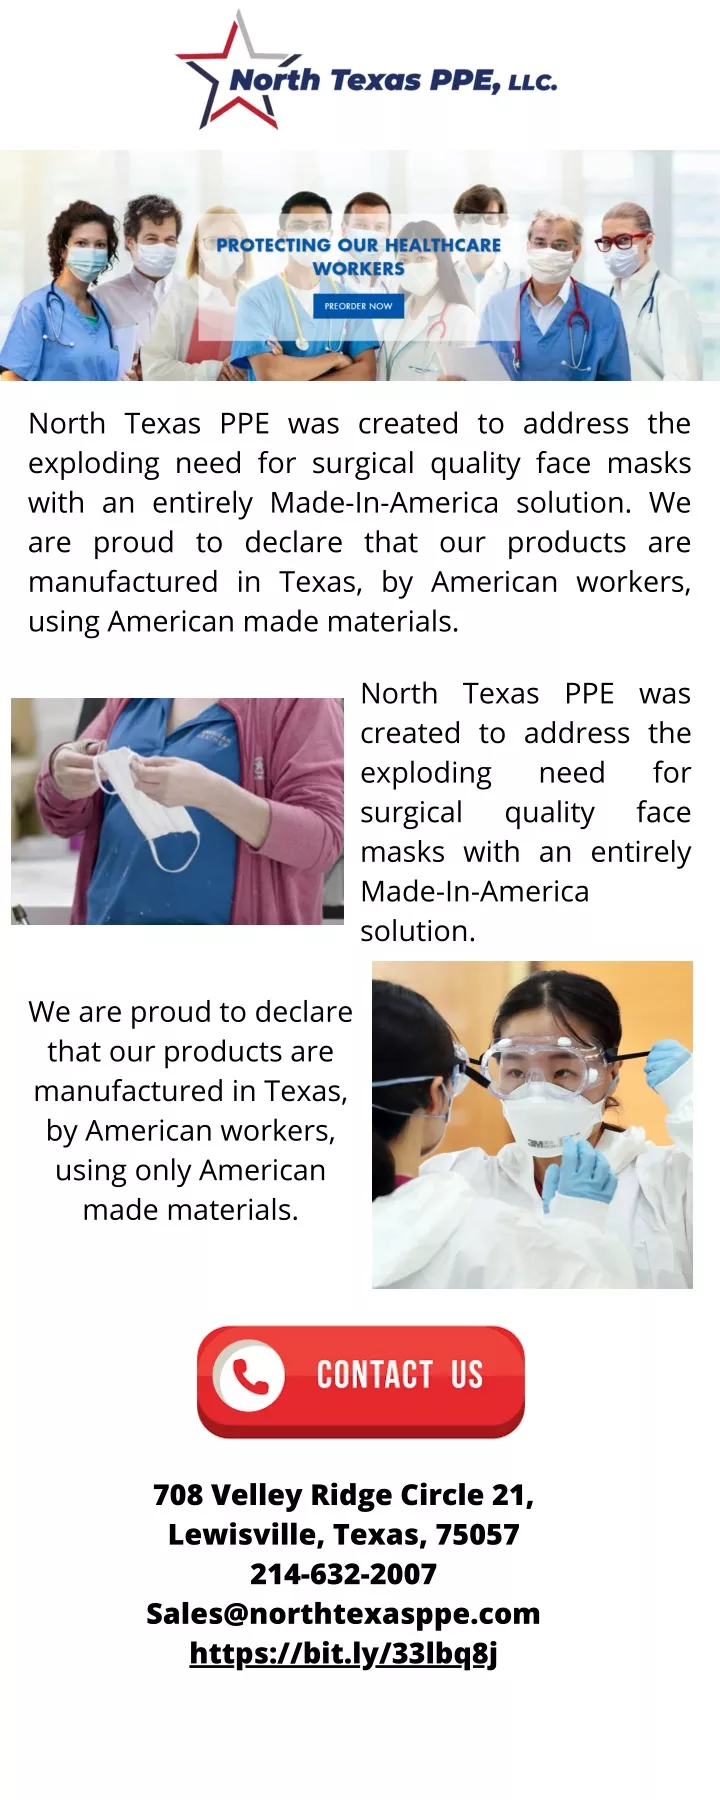 north texas ppe was created to address